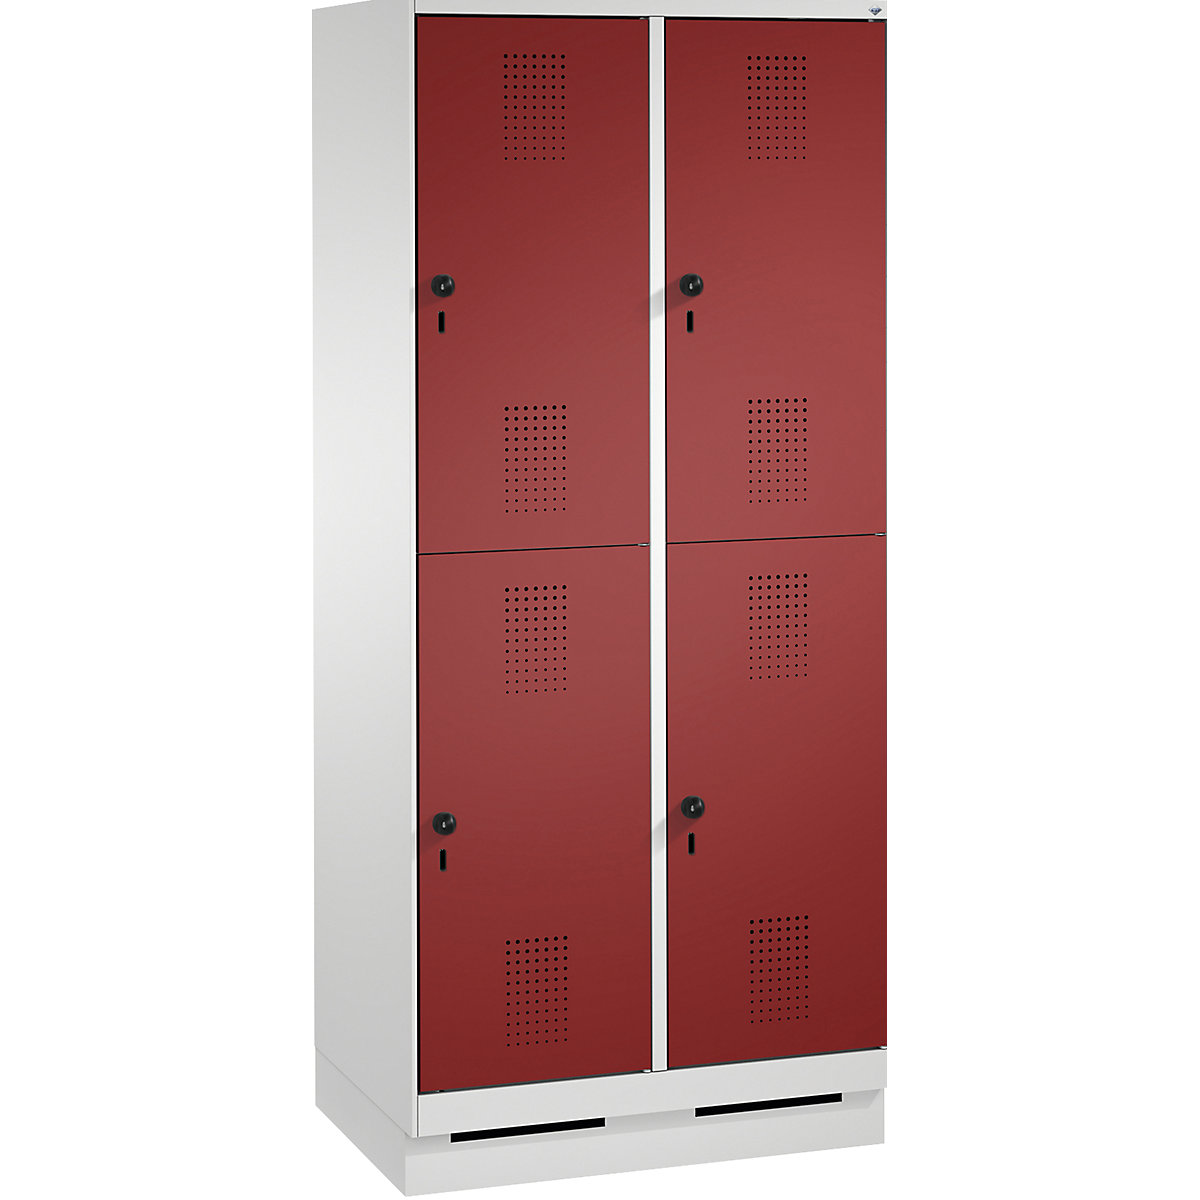 EVOLO cloakroom locker, double tier, with plinth – C+P, 2 compartments, 2 shelf compartments each, compartment width 400 mm, light grey / ruby red-4